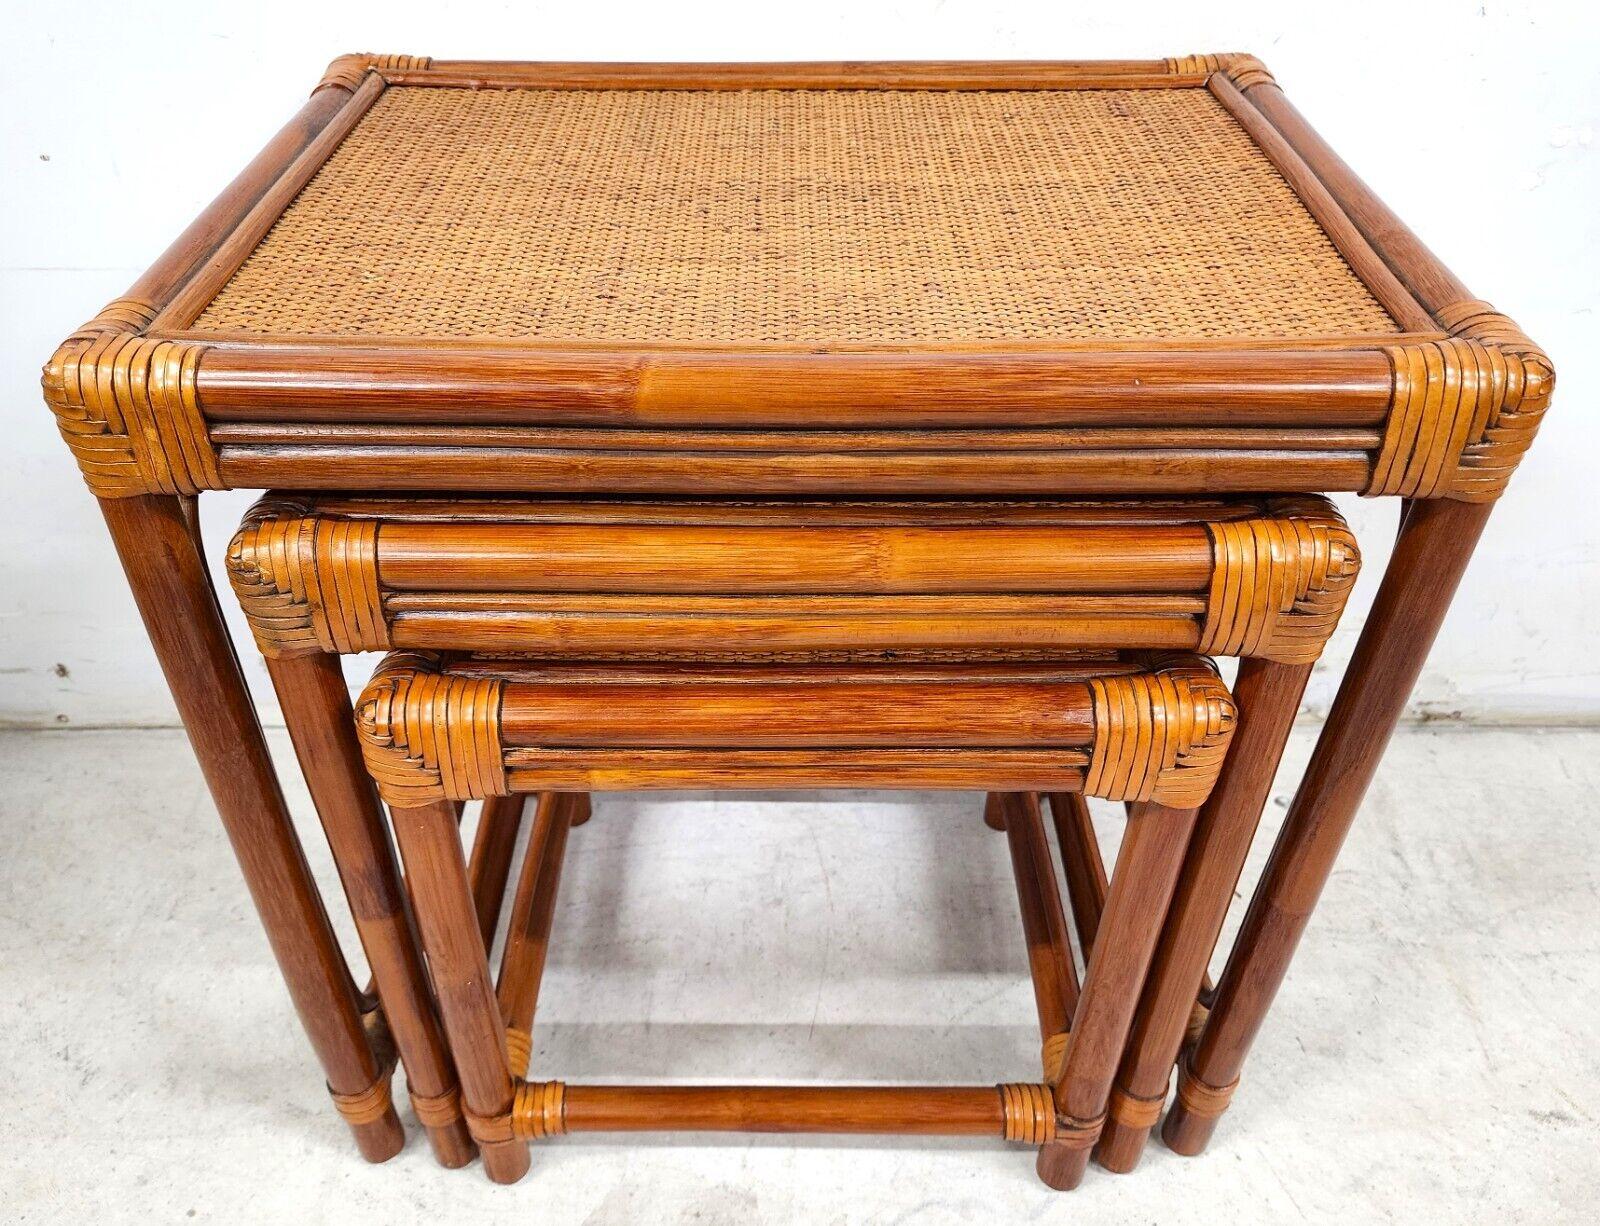 For FULL item description be sure to click on CONTINUE READING at the bottom of this listing.

Vintage set of 3 bamboo nesting tables 
With leather rattan strapping and wicker tops

Approximate measurements in inches
Large: 22